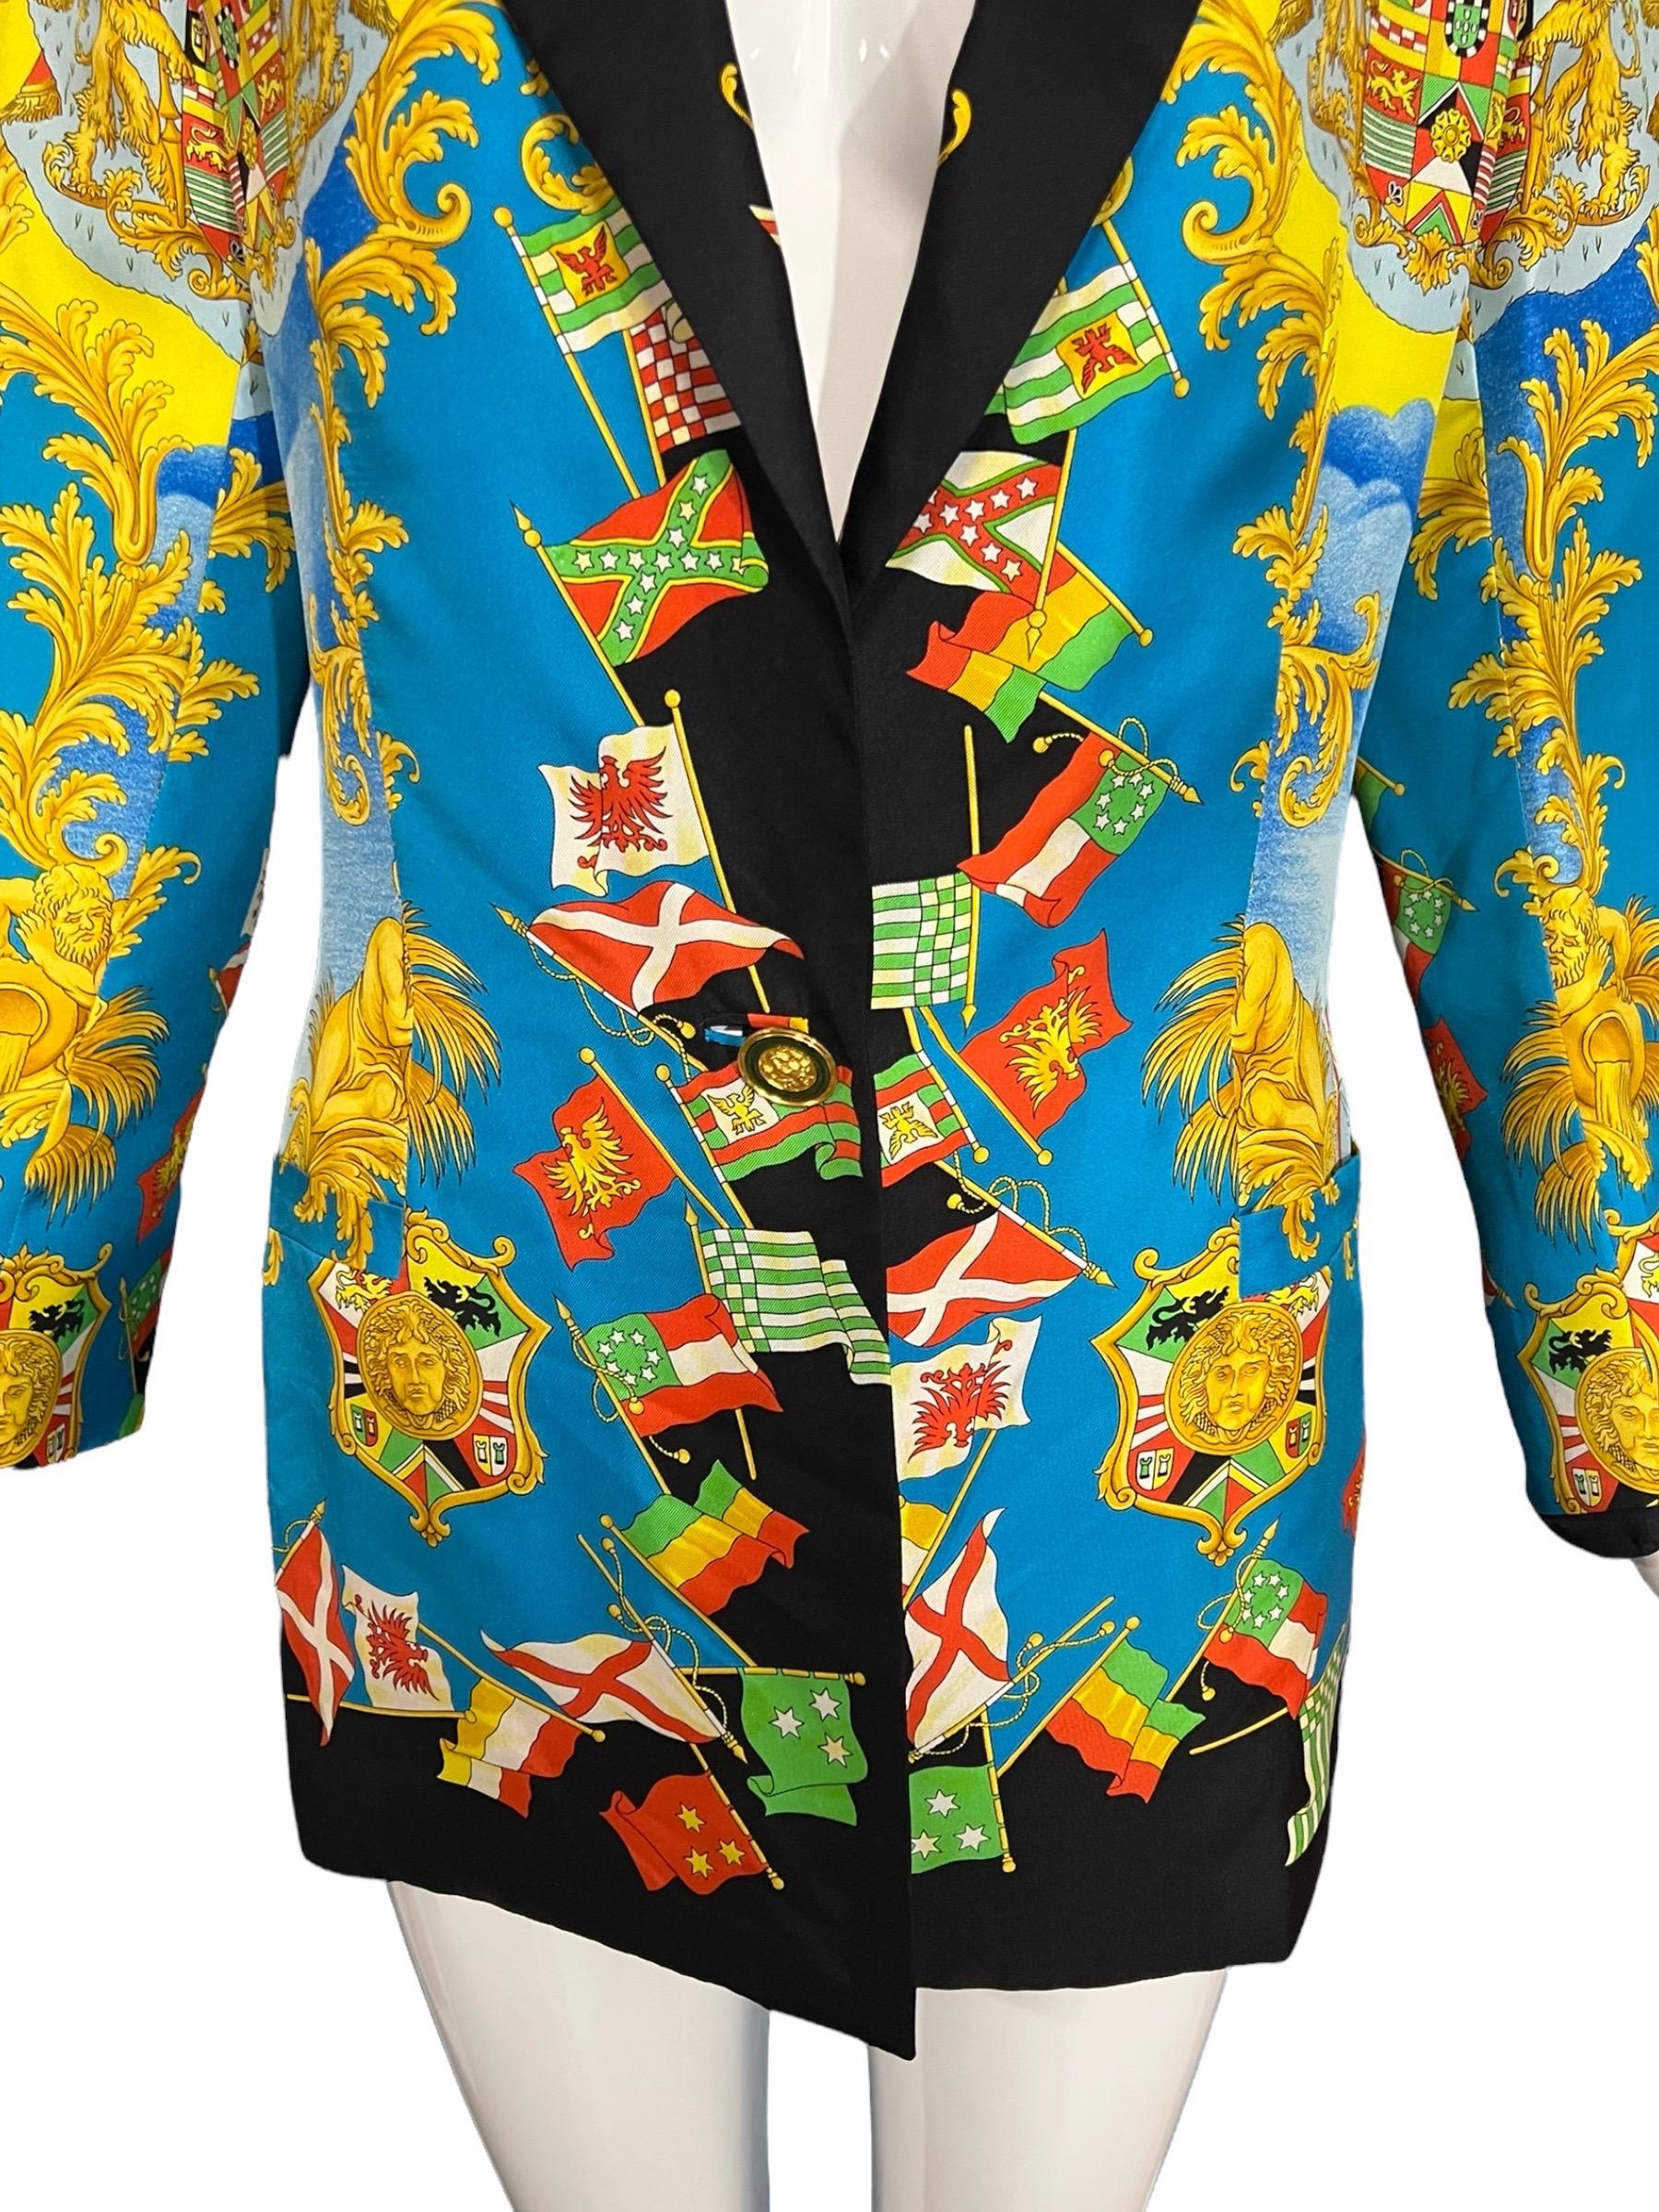 S/S 1993 Gianni Versace Baroque Flags Silk Blazer Jacket Miami Collection  In Excellent Condition For Sale In Concord, NC